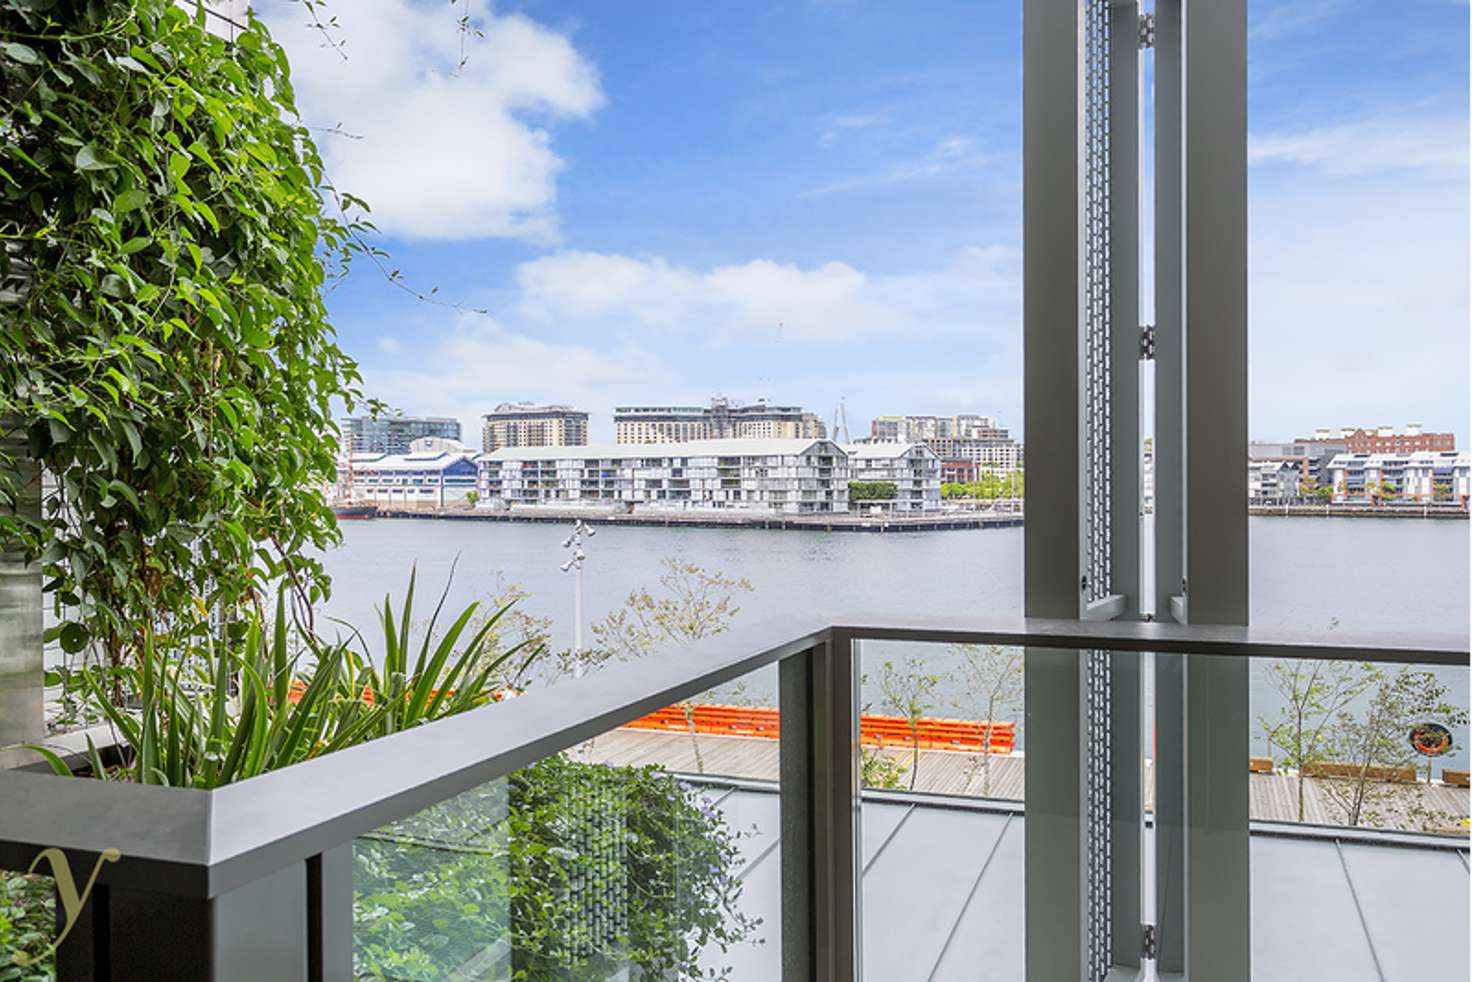 Main view of Homely apartment listing, 25 Barangaroo Avenue, Sydney NSW 2000